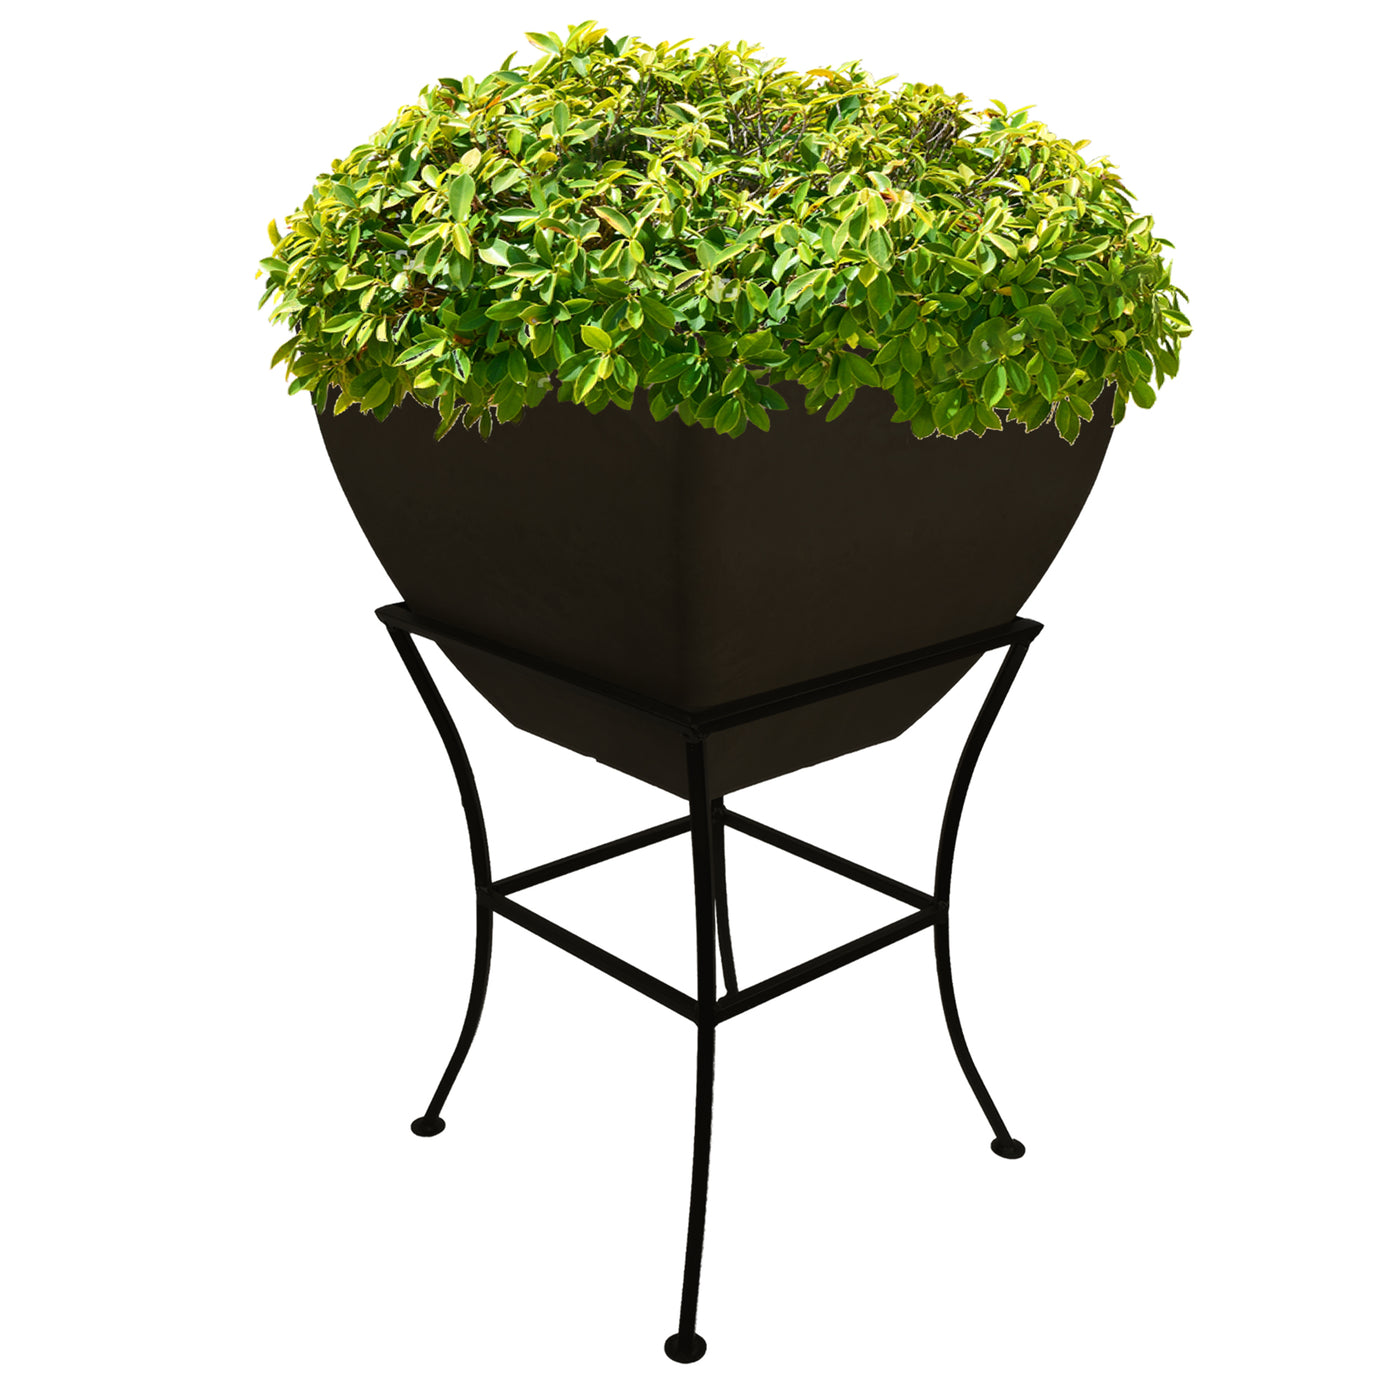 Elevated Square Urban Body Planter with stand 20" Square- Graphite - GreenLivingSupply-Store